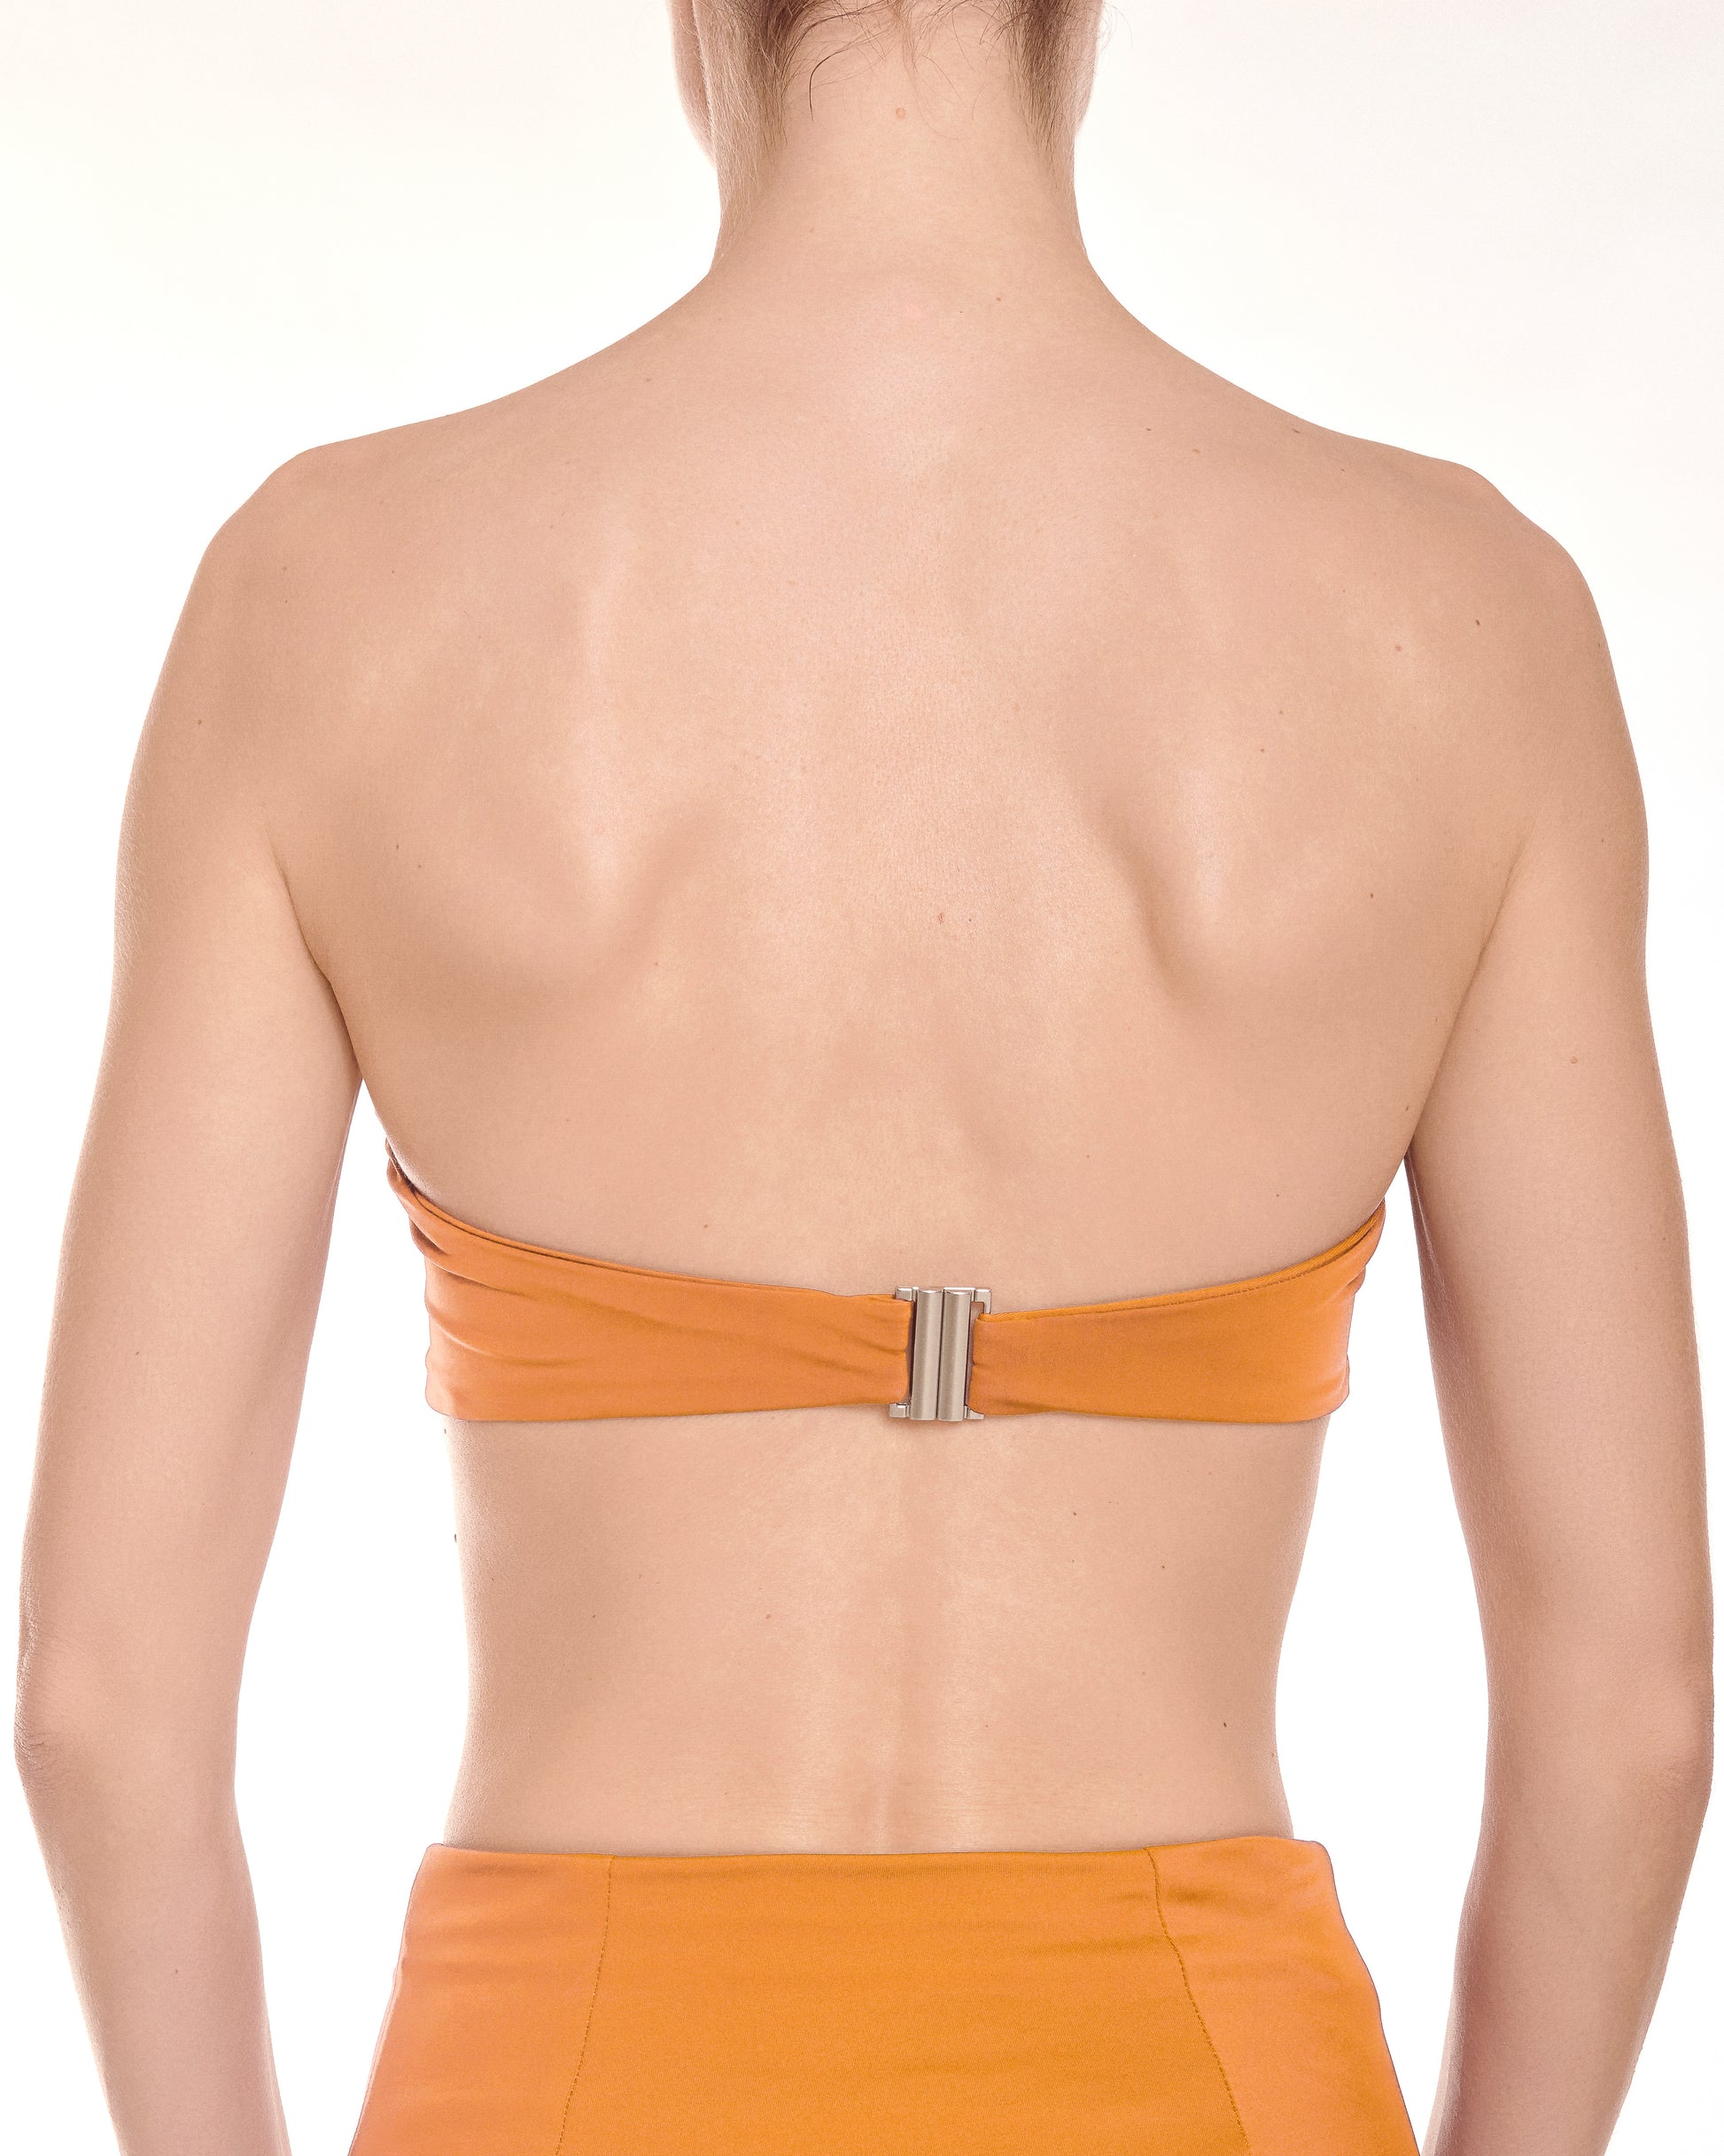 Latest collection of stylish and versatile bikinis showcasing a flattering strapless silhouette